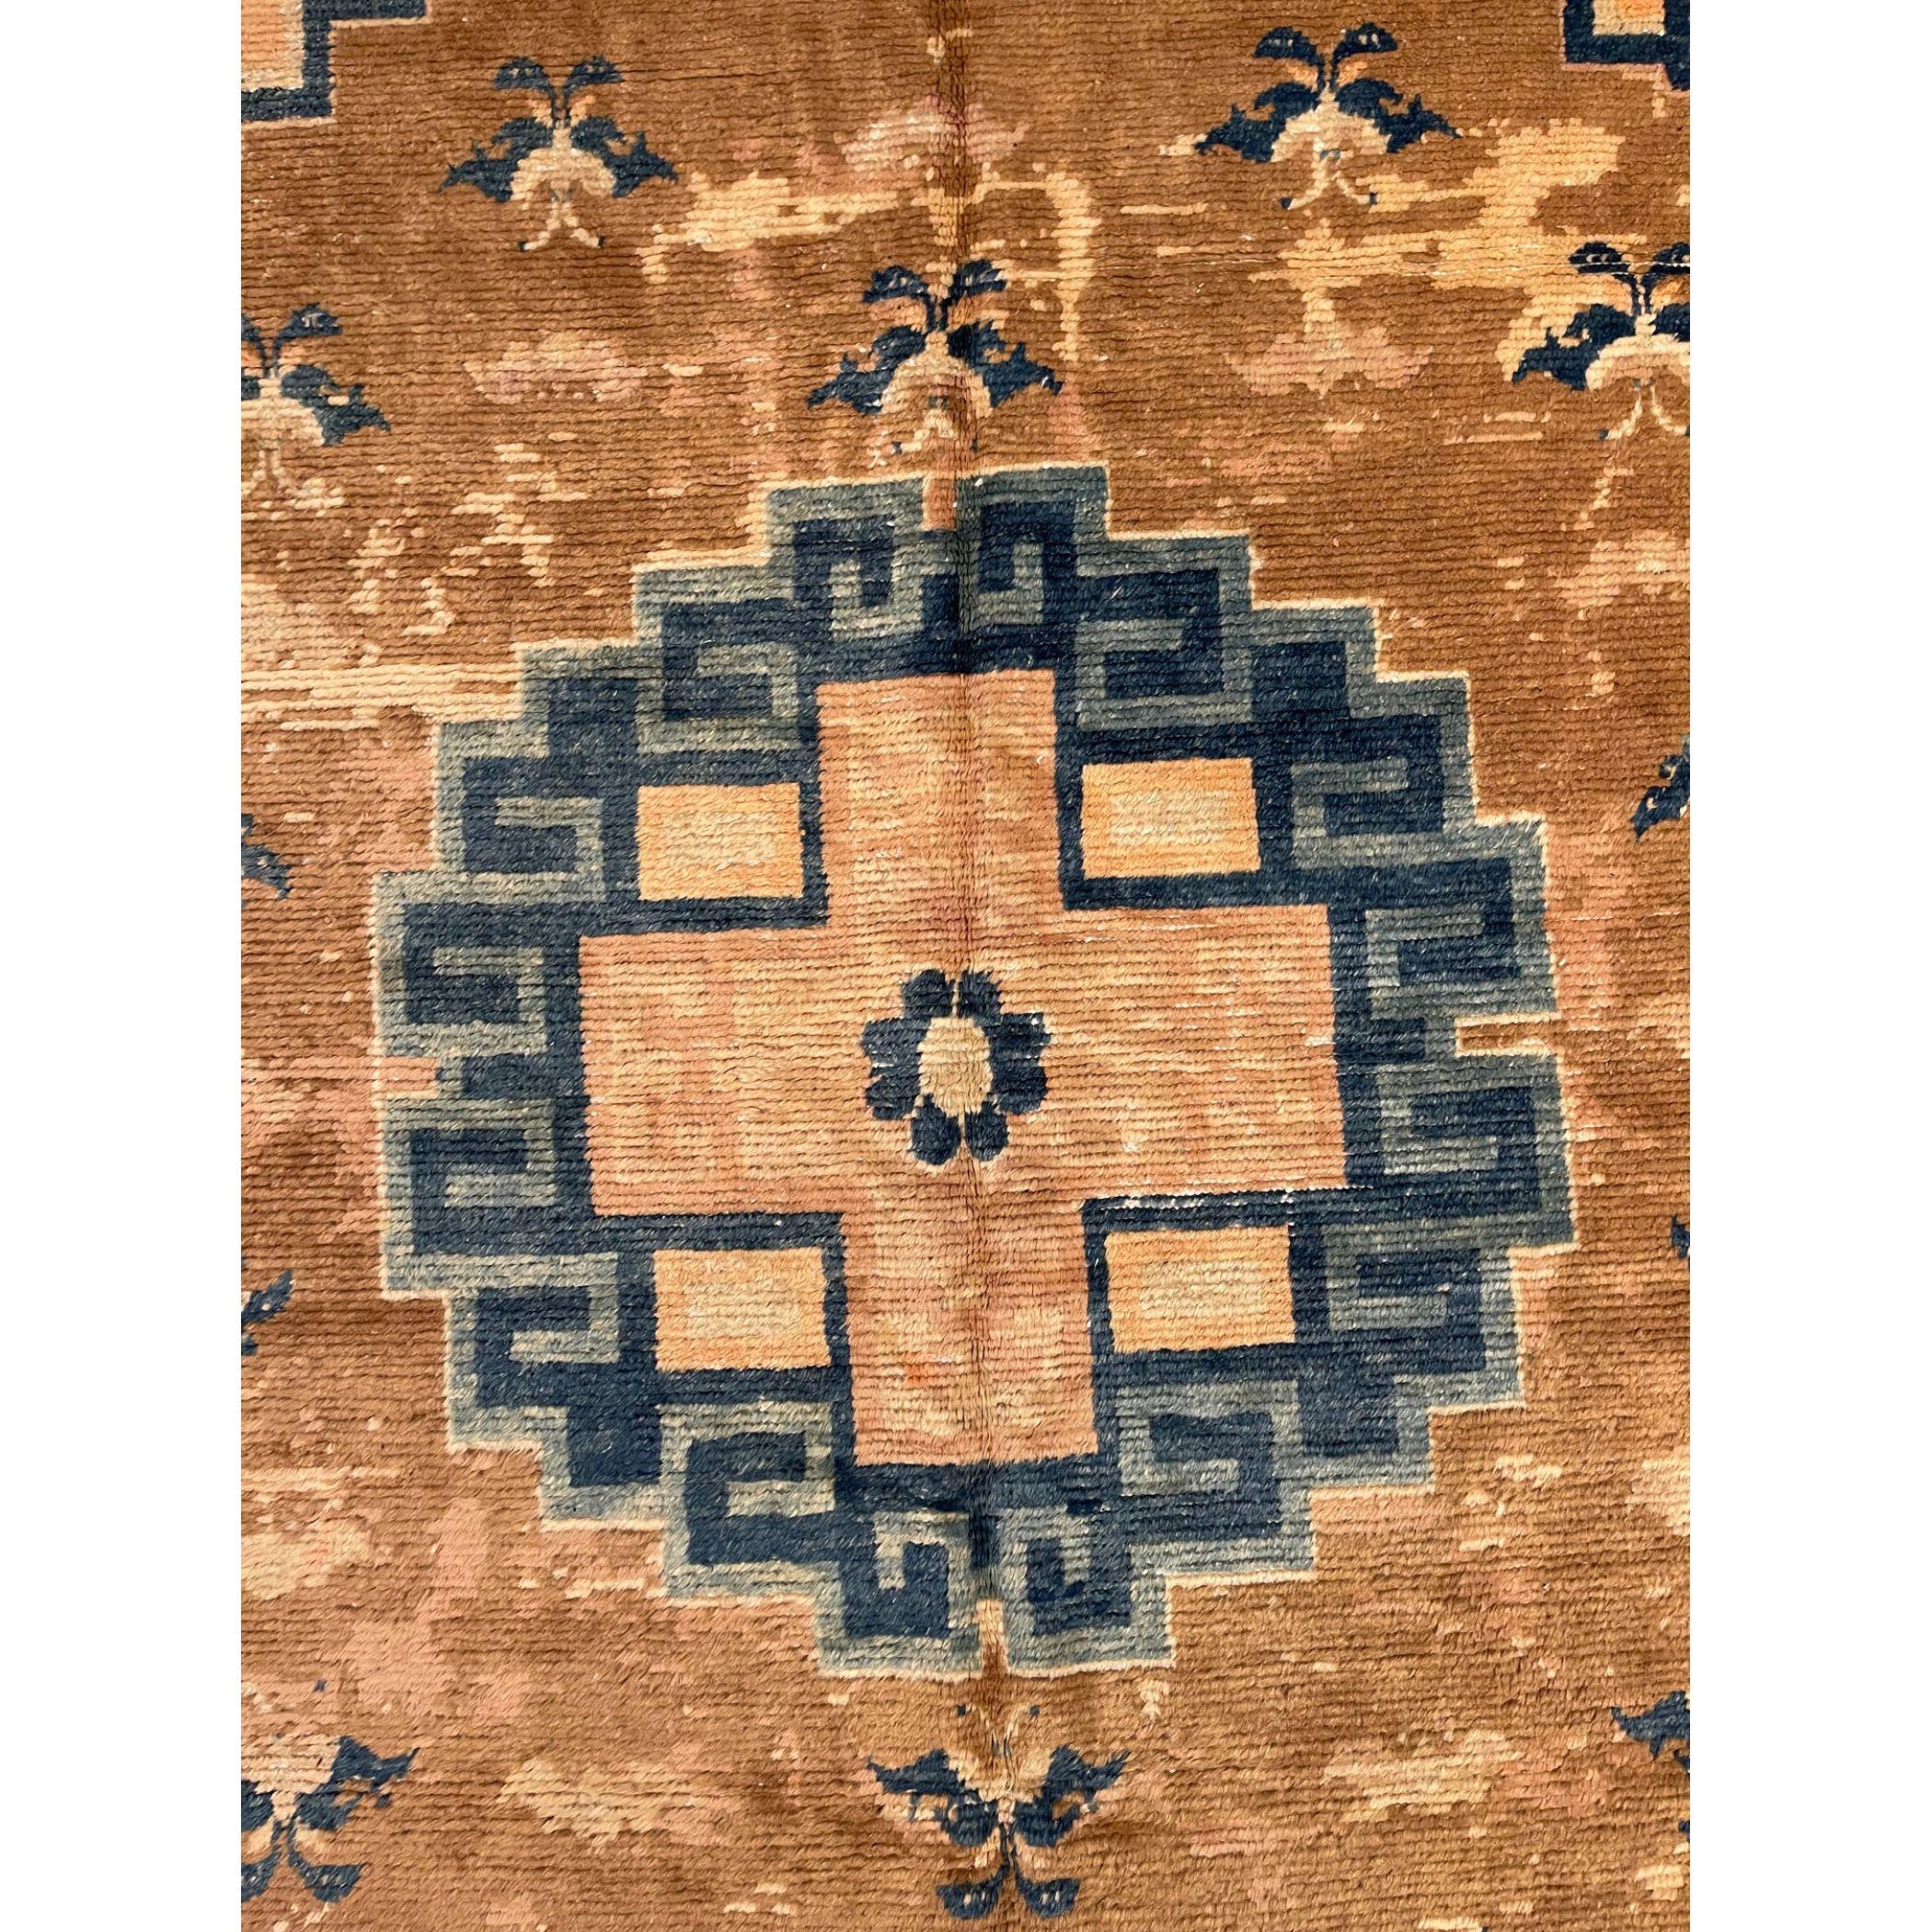 Antique Chinese Rugs, as opposed to most of the antique rug productions, were woven almost exclusively for internal consumption. Since they were mostly sheltered from European and Western influences, this offers us the reason why these carpets have